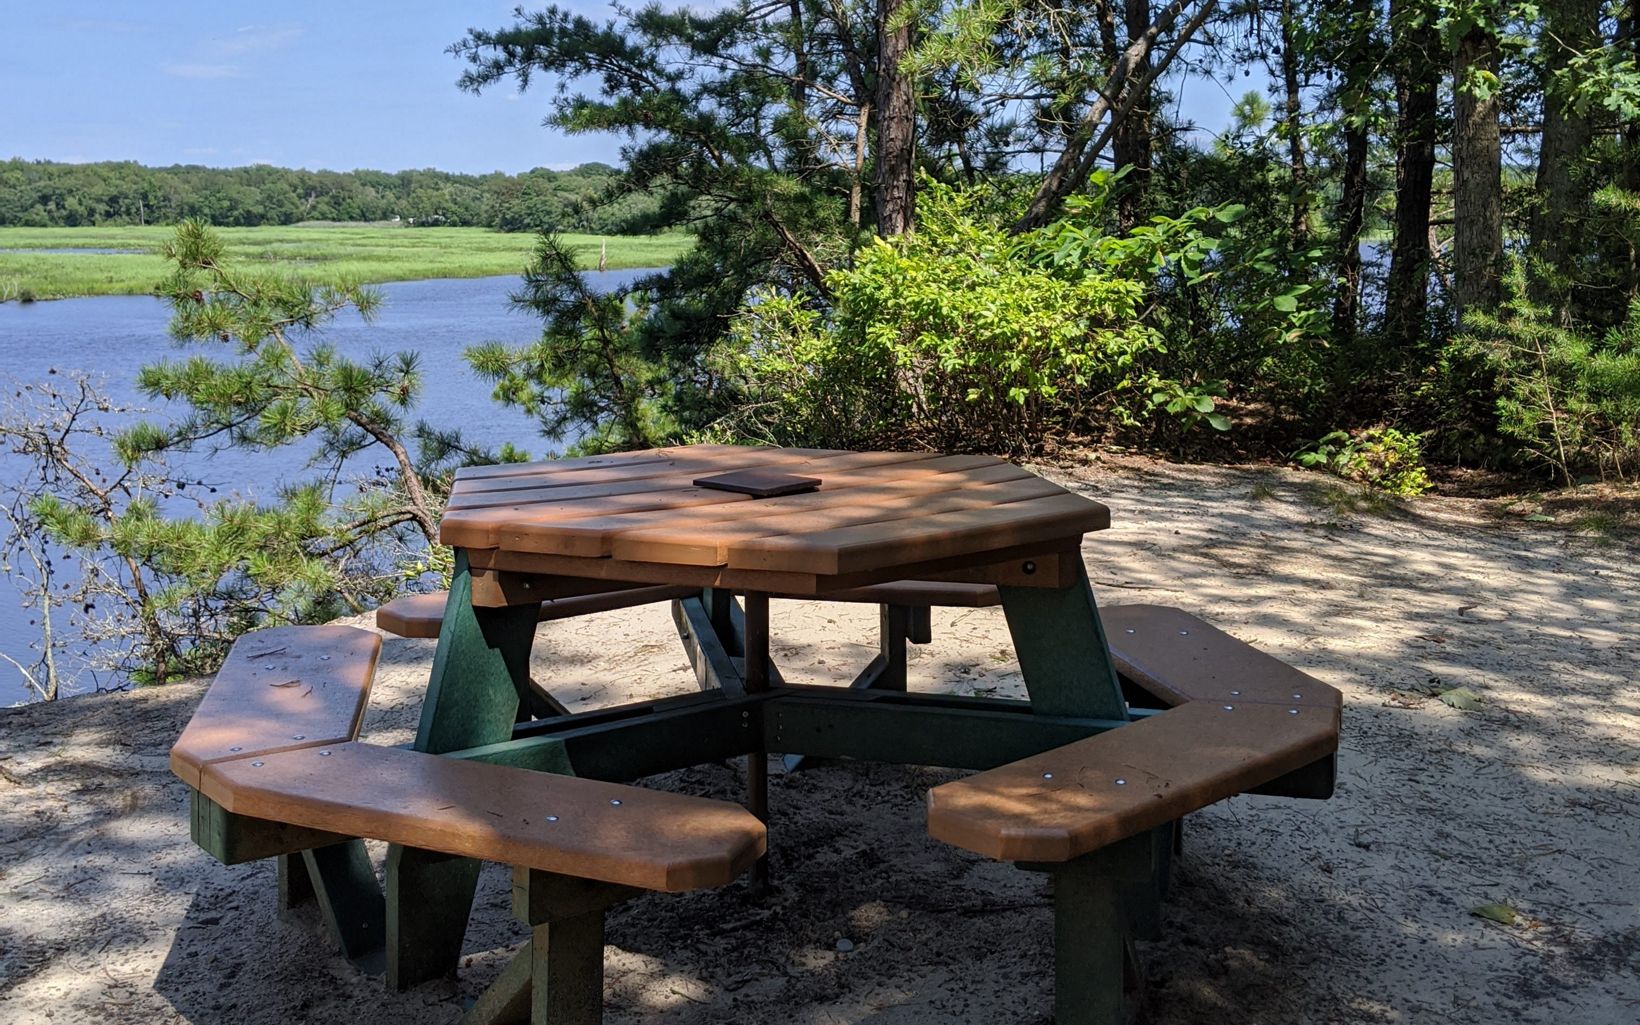 A picnic table sits next to a river and wetlands.